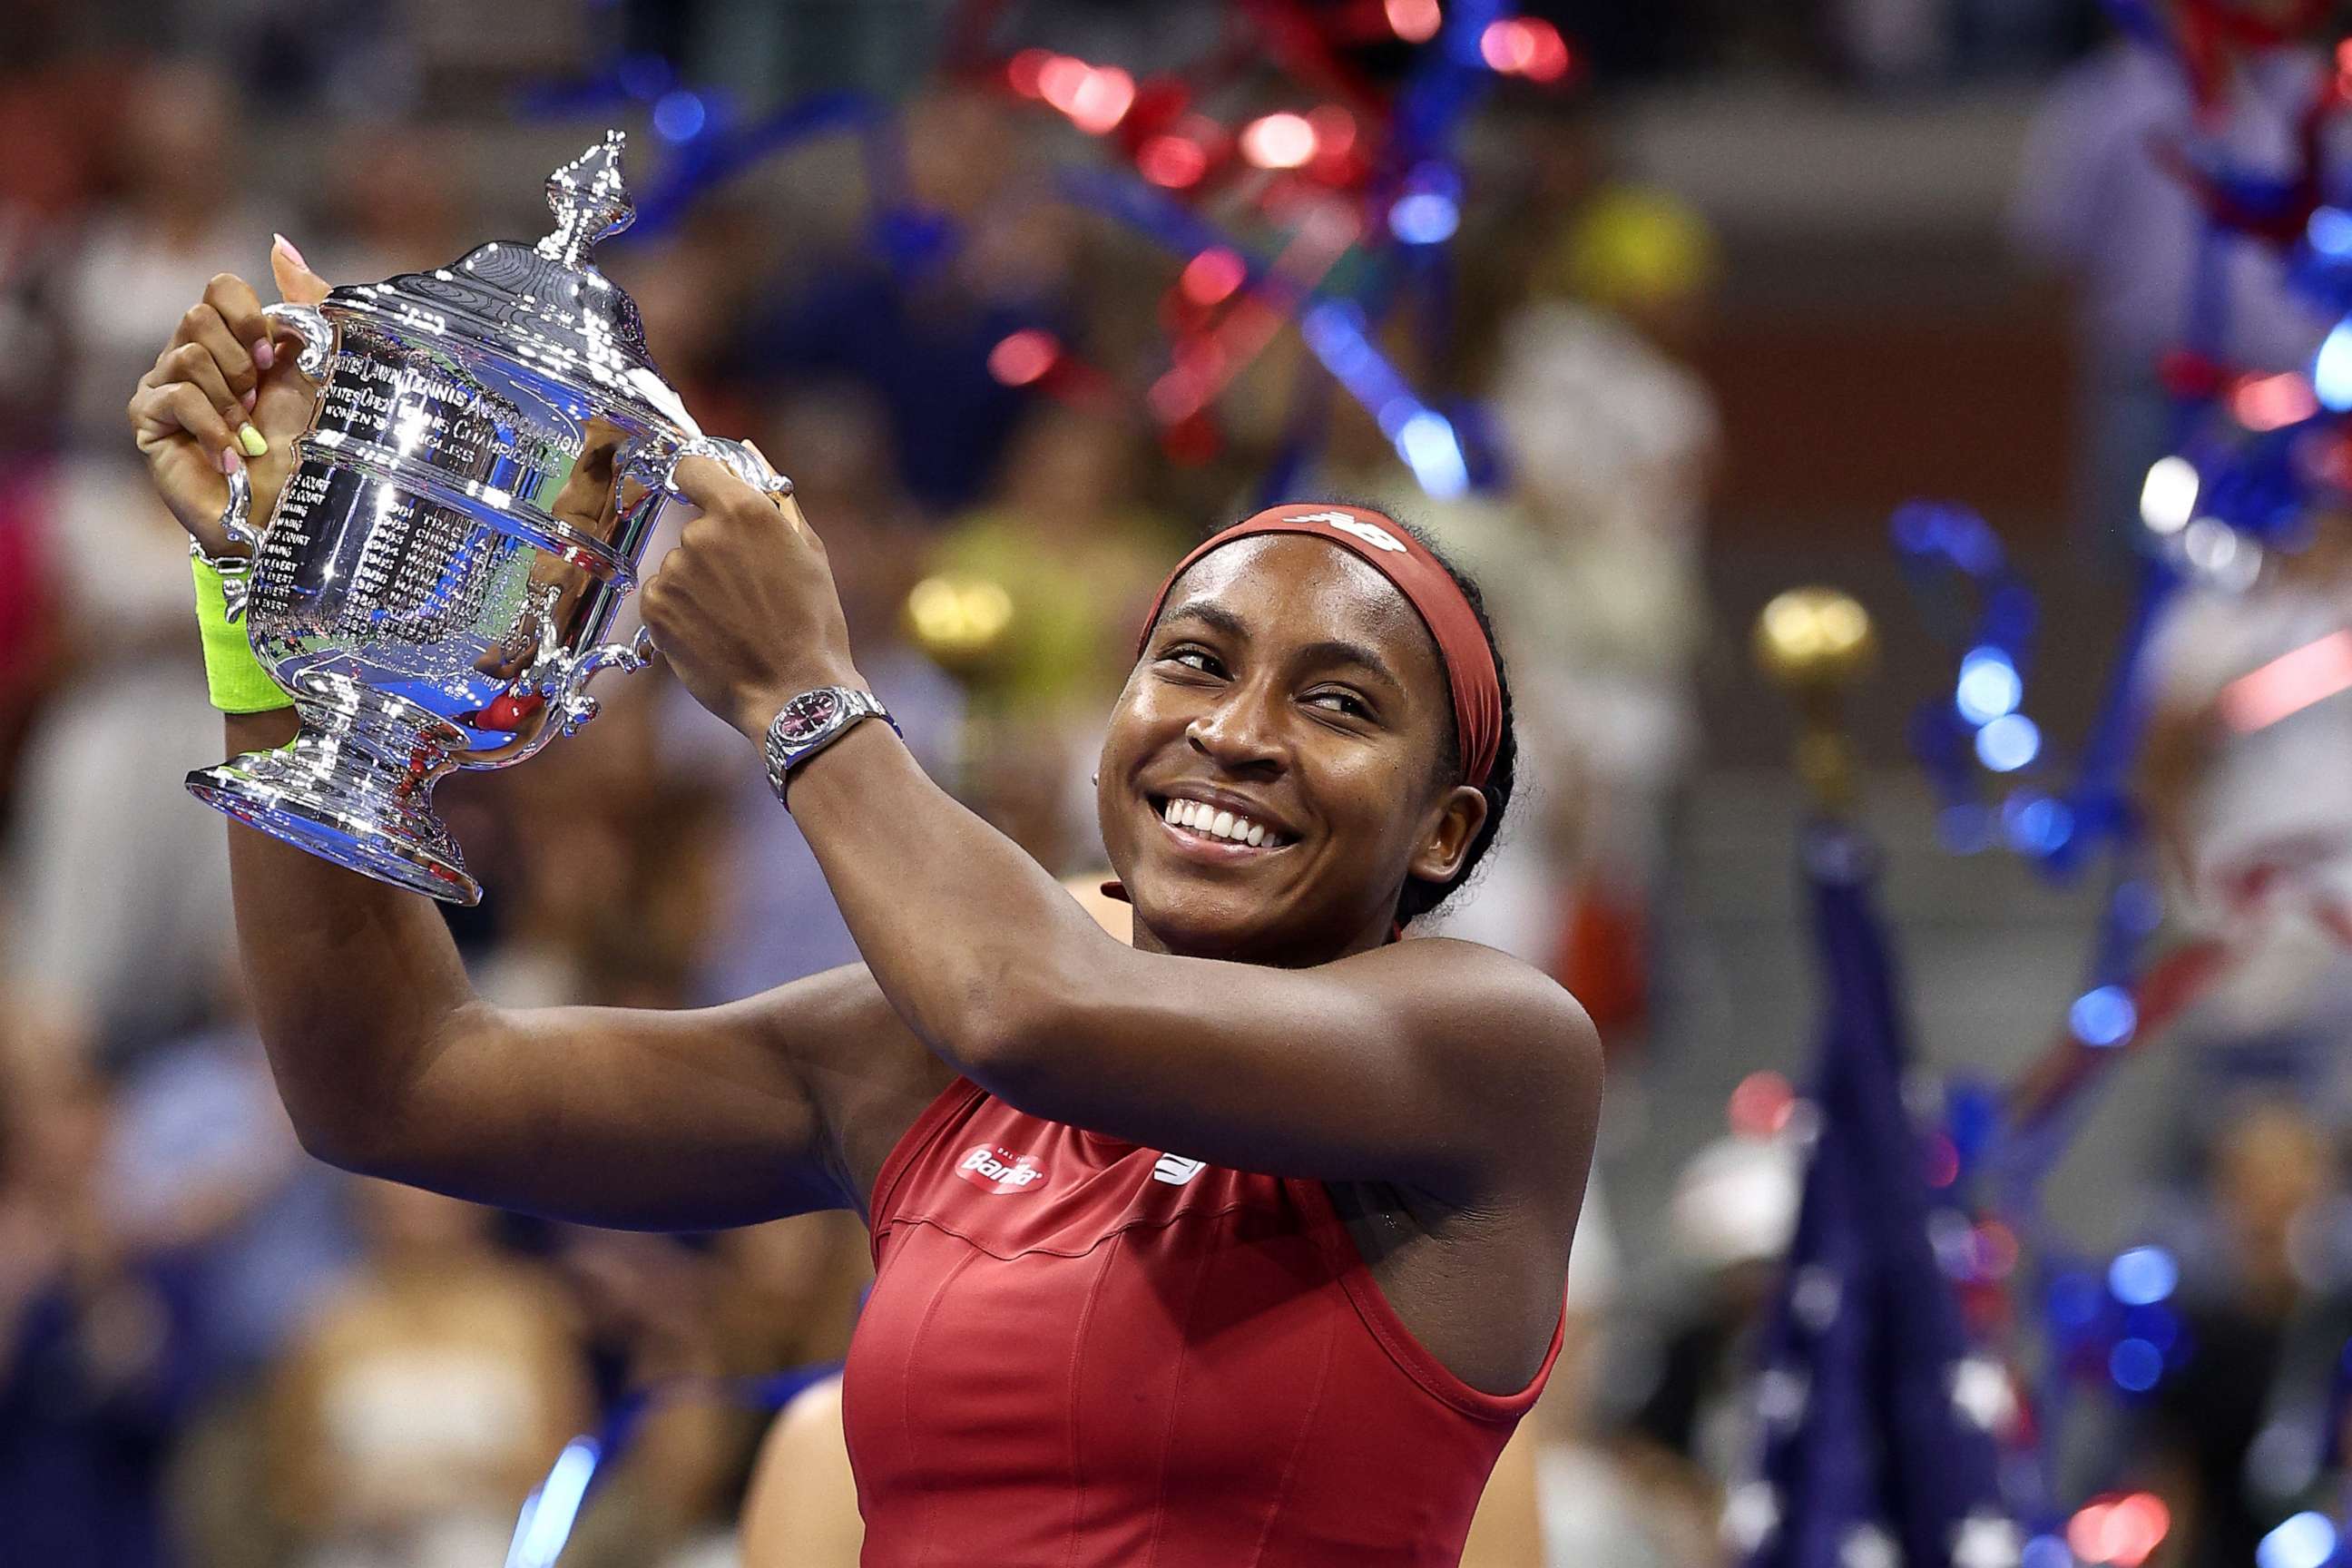 Brought to tears': Coco Gauff describes the moments after her US Open win -  ABC News